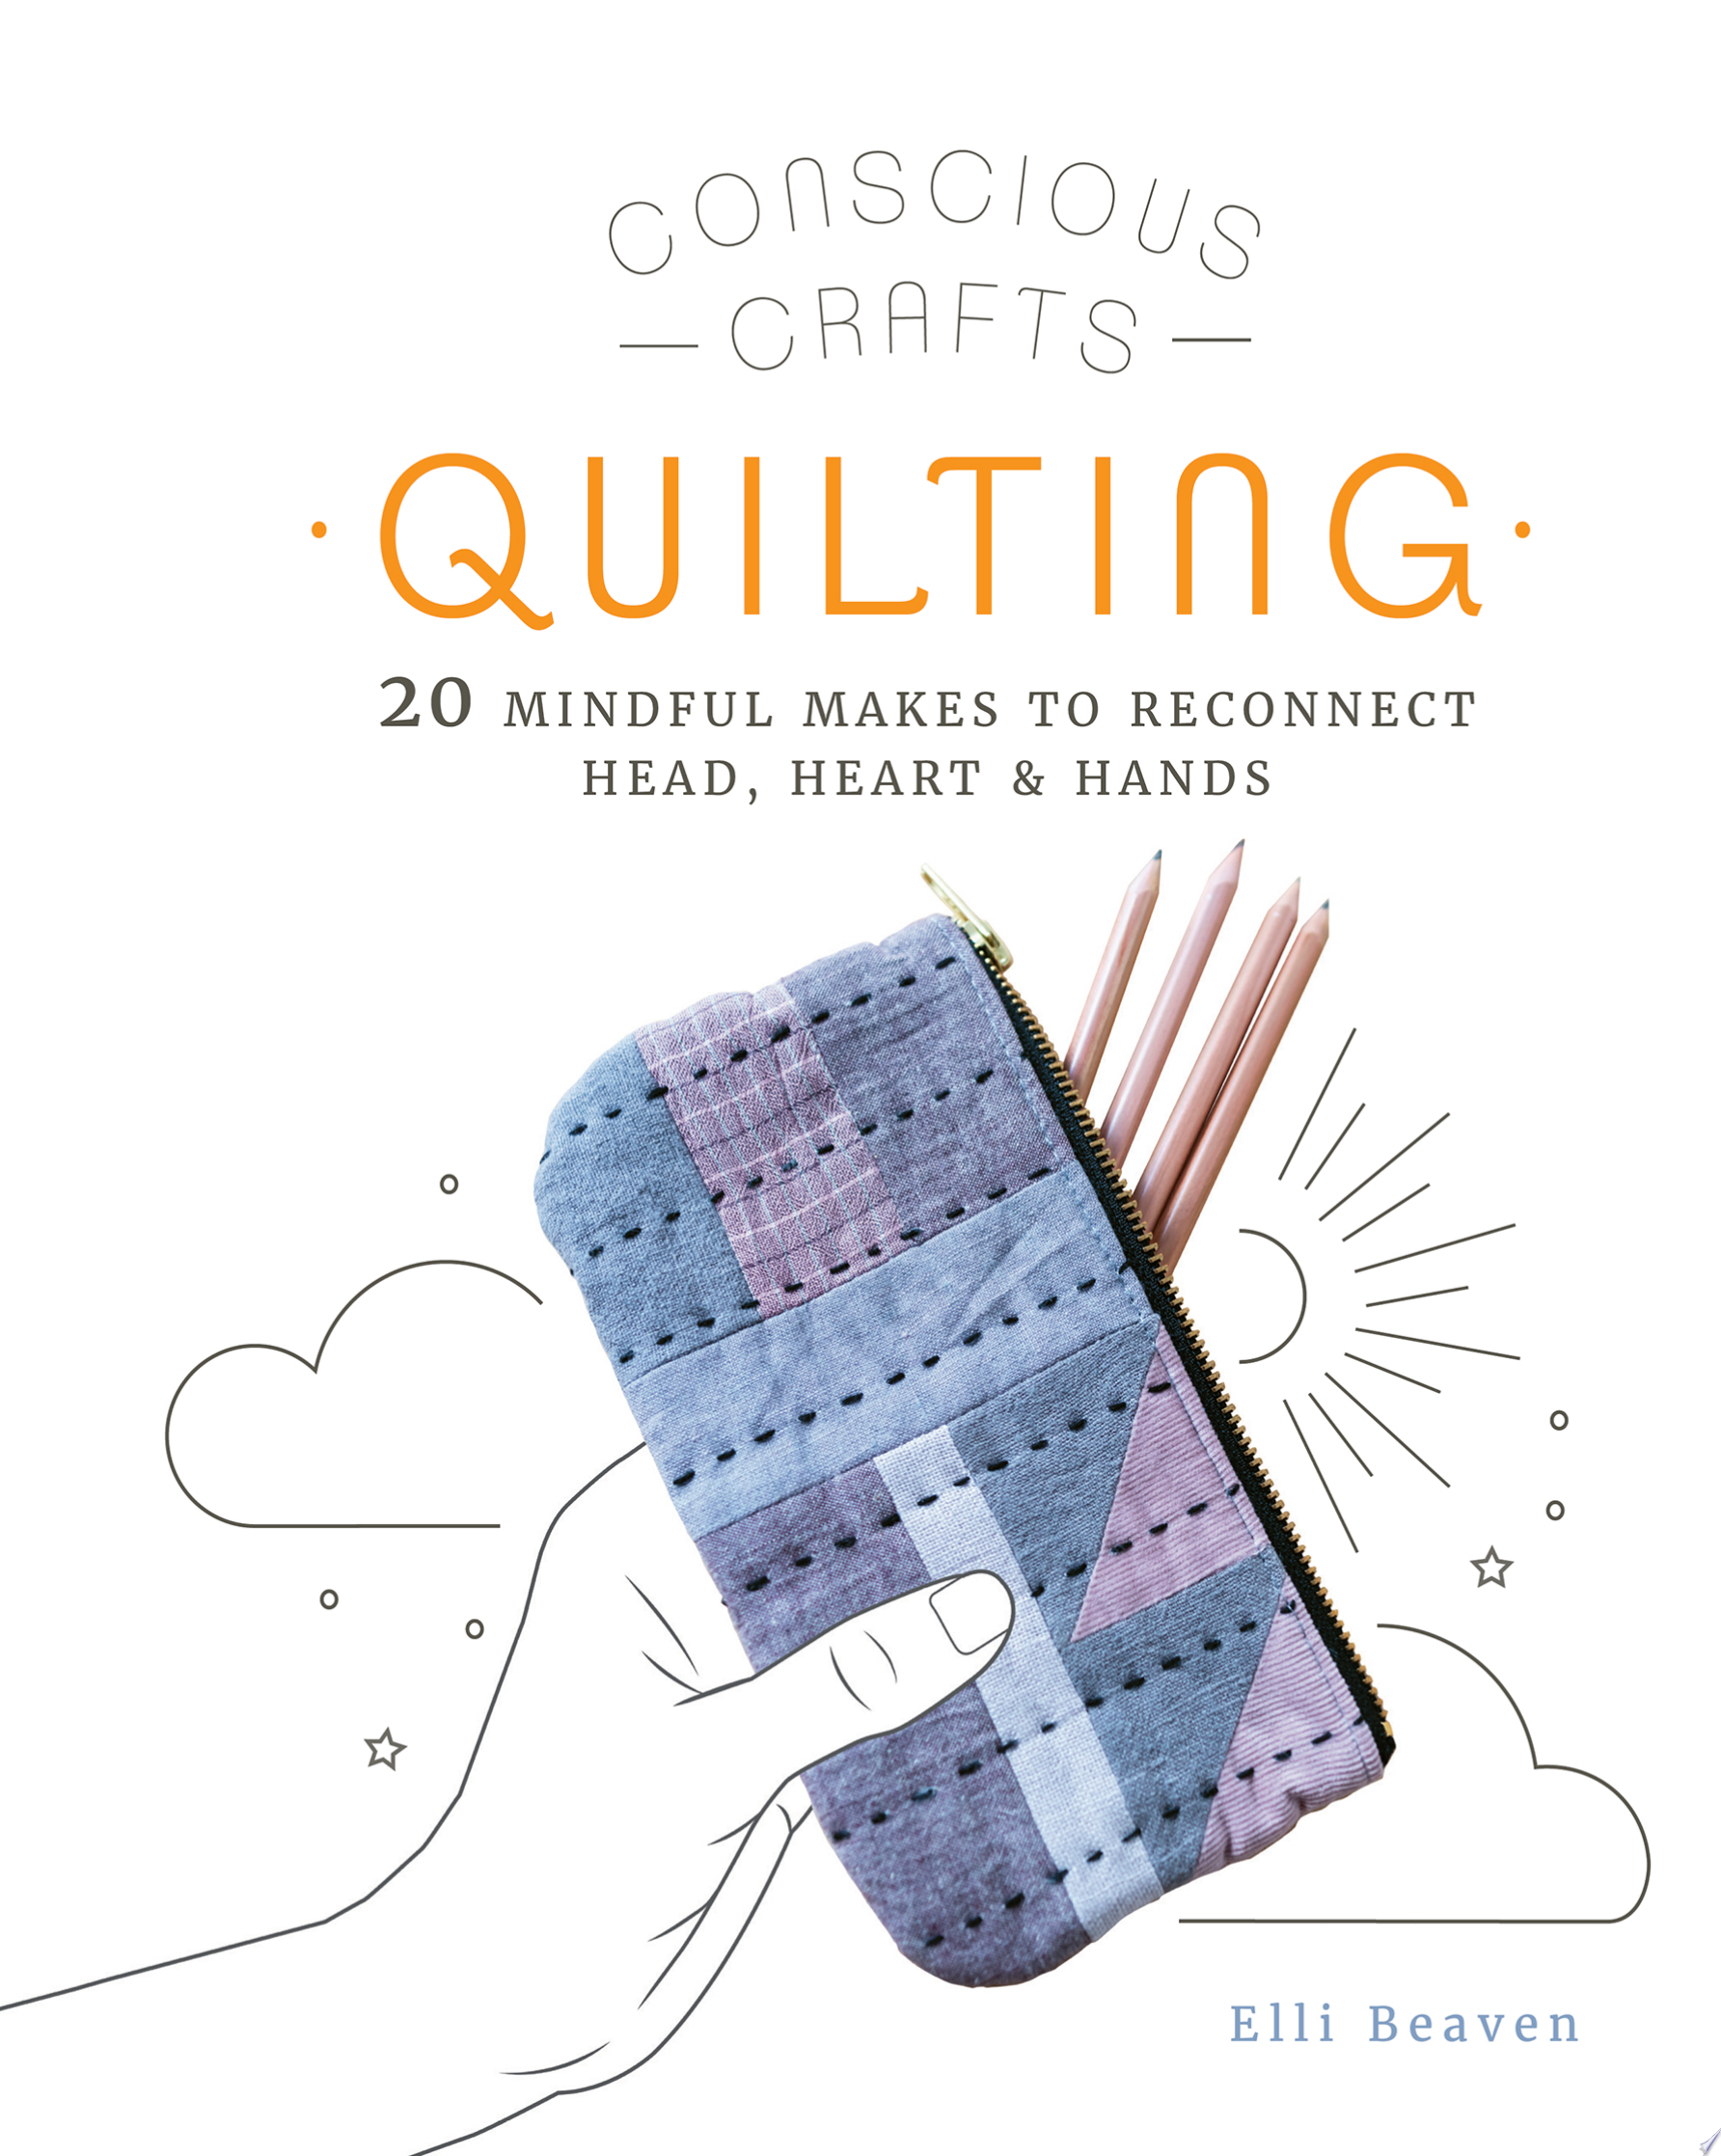 Image for "Conscious Crafts: Quilting"